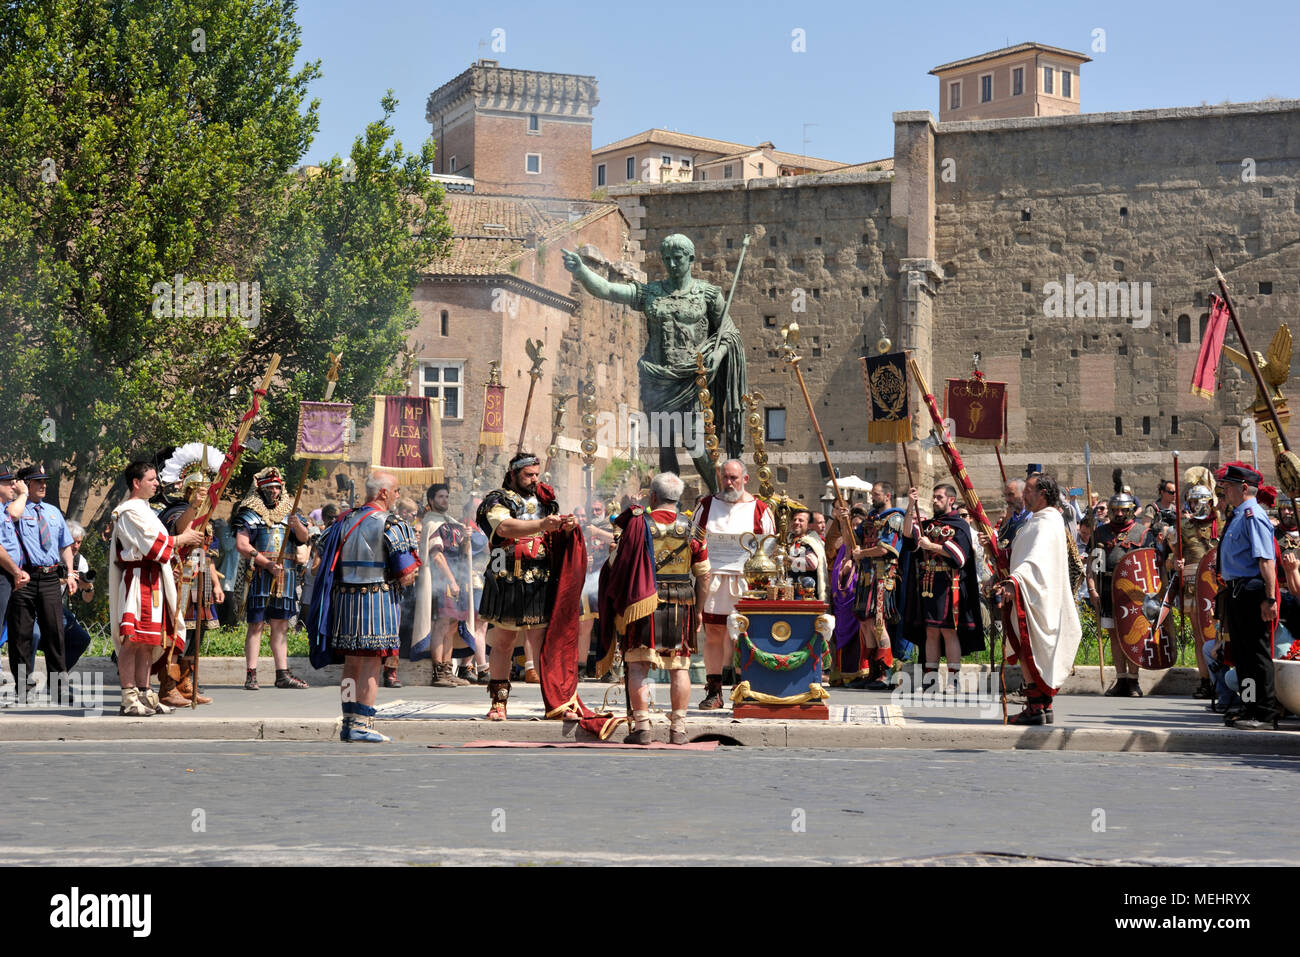 Rome, Italy. 22nd April, 2018. Natale di Roma in Rome, Italy. Rome celebrates the 2771st anniversary of the foundation of the city in 21st April 753 B.C. Historical parade in the streets of Rome. People are dressed in ancient roman costumes. Ceremony at the statue of Augustus in Via dei Fori Imperiali. Credit: Vito Arcomano/Alamy Live News Stock Photo